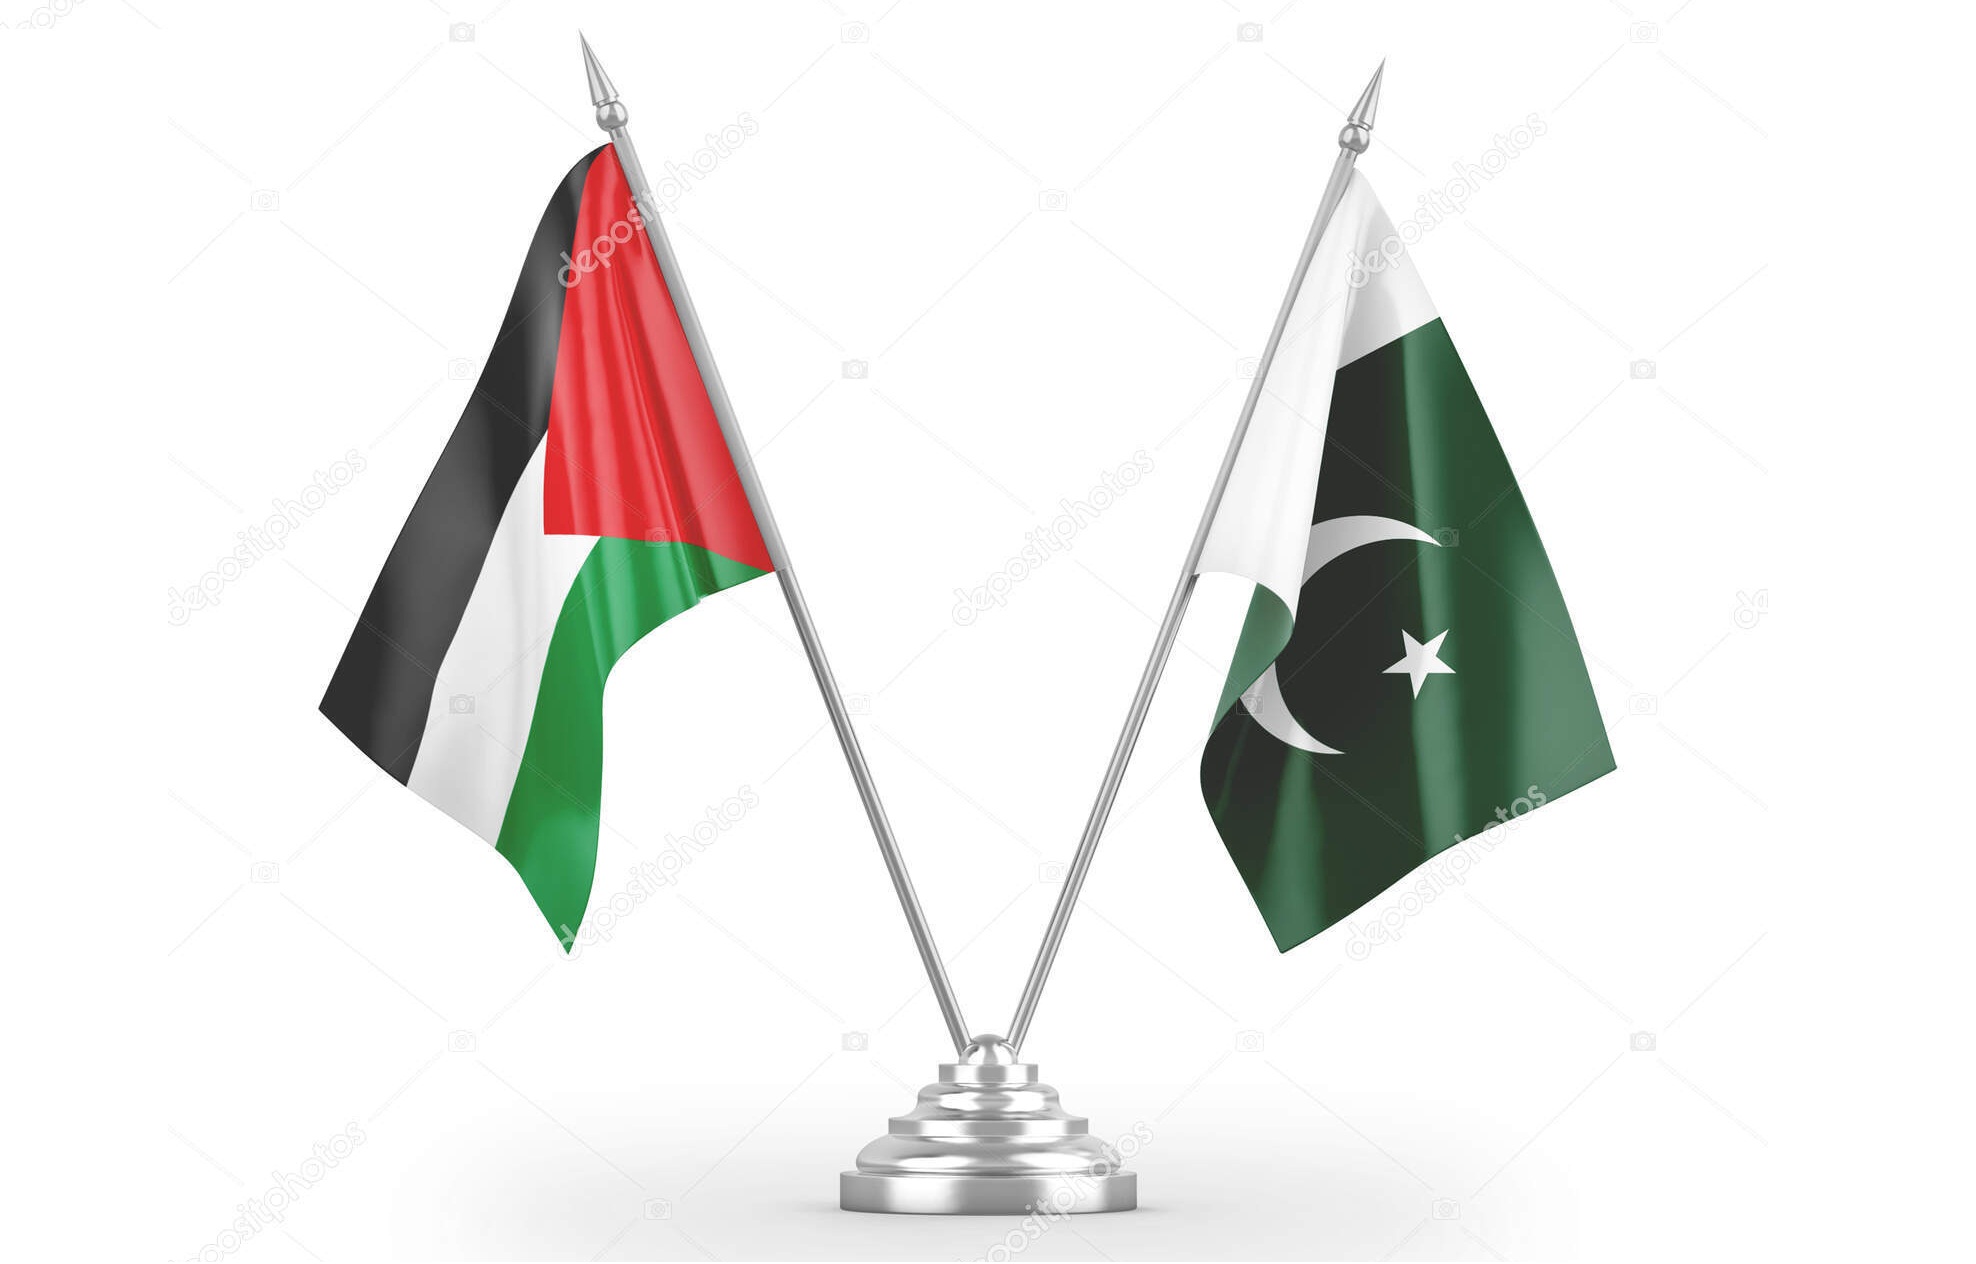 Pakistan says its approach to be guided by Palestinian aspirations